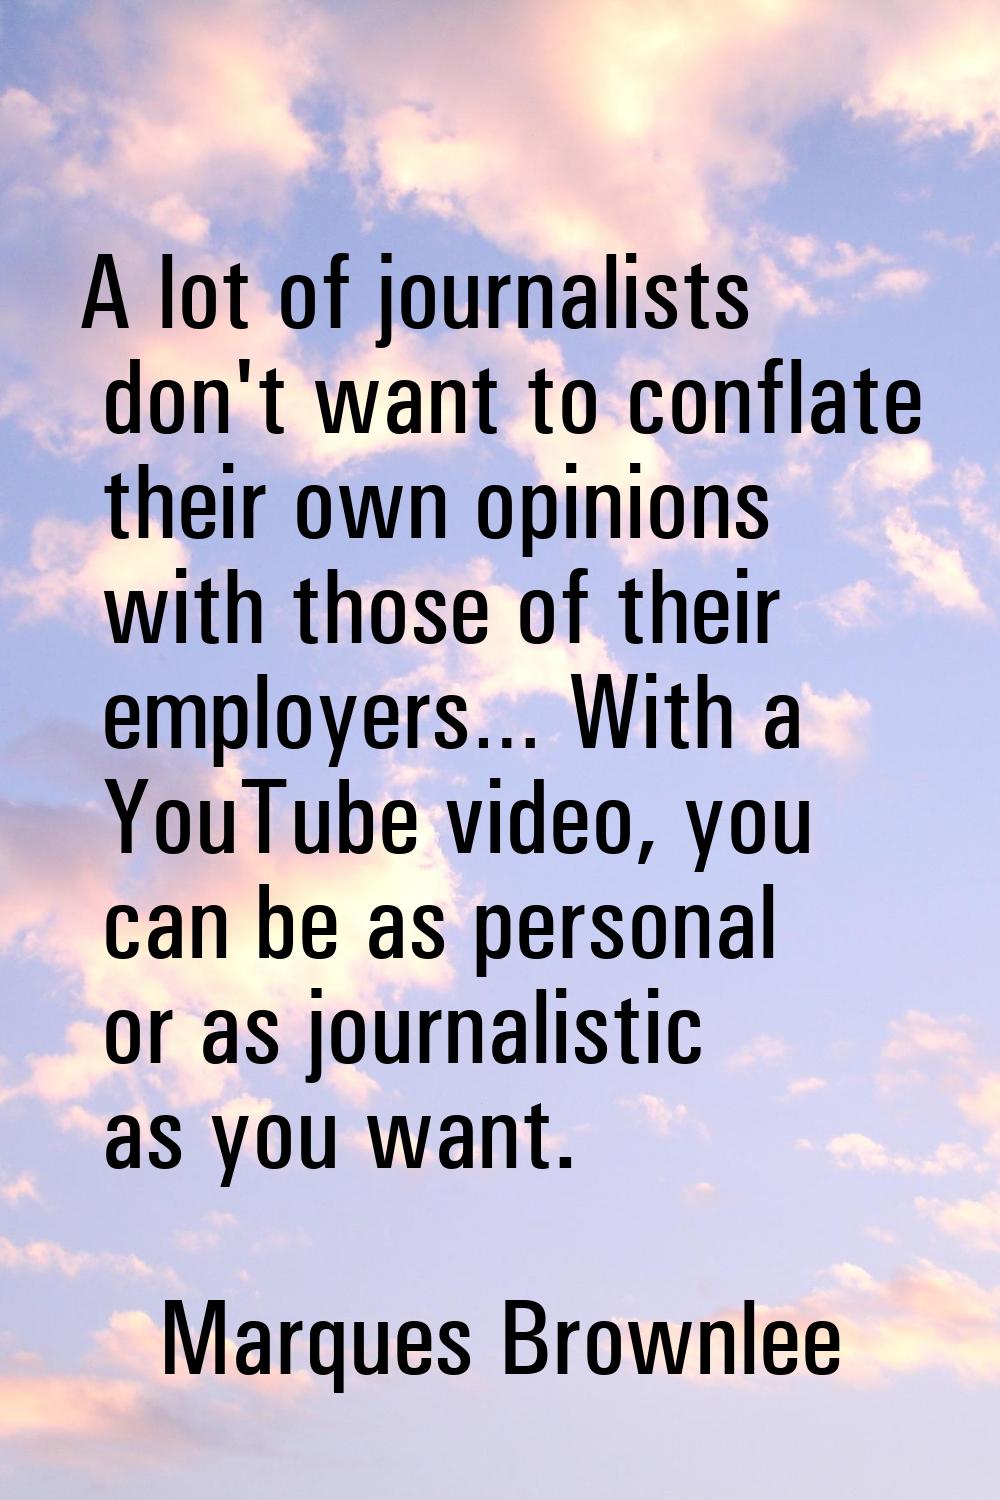 A lot of journalists don't want to conflate their own opinions with those of their employers… With 